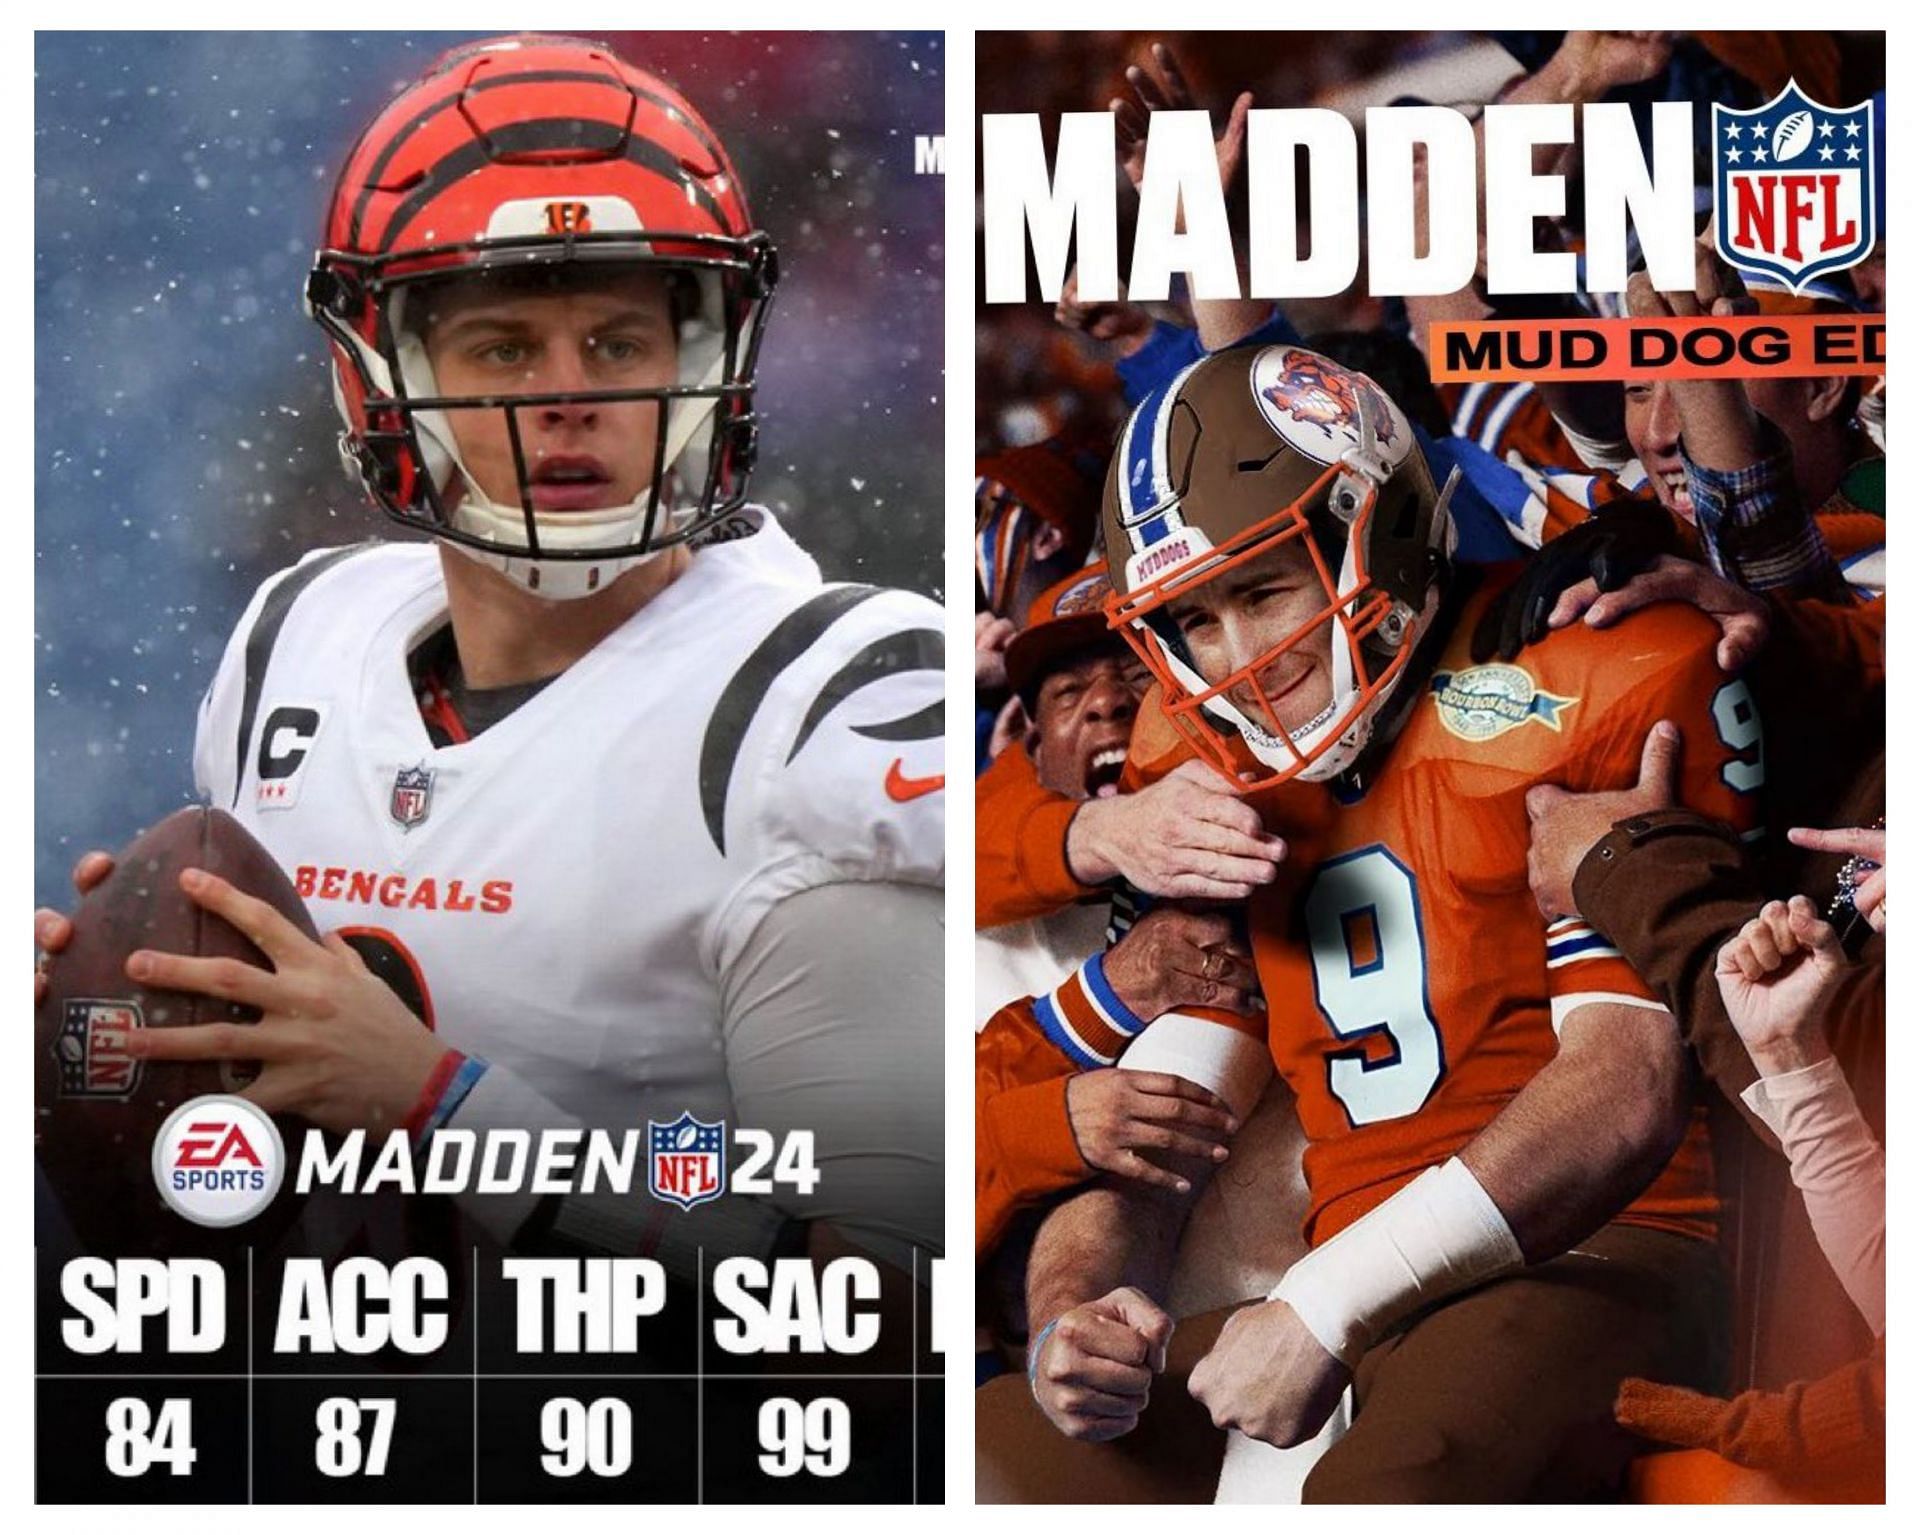 Will 'Madden 23' Be Available on EA Play?